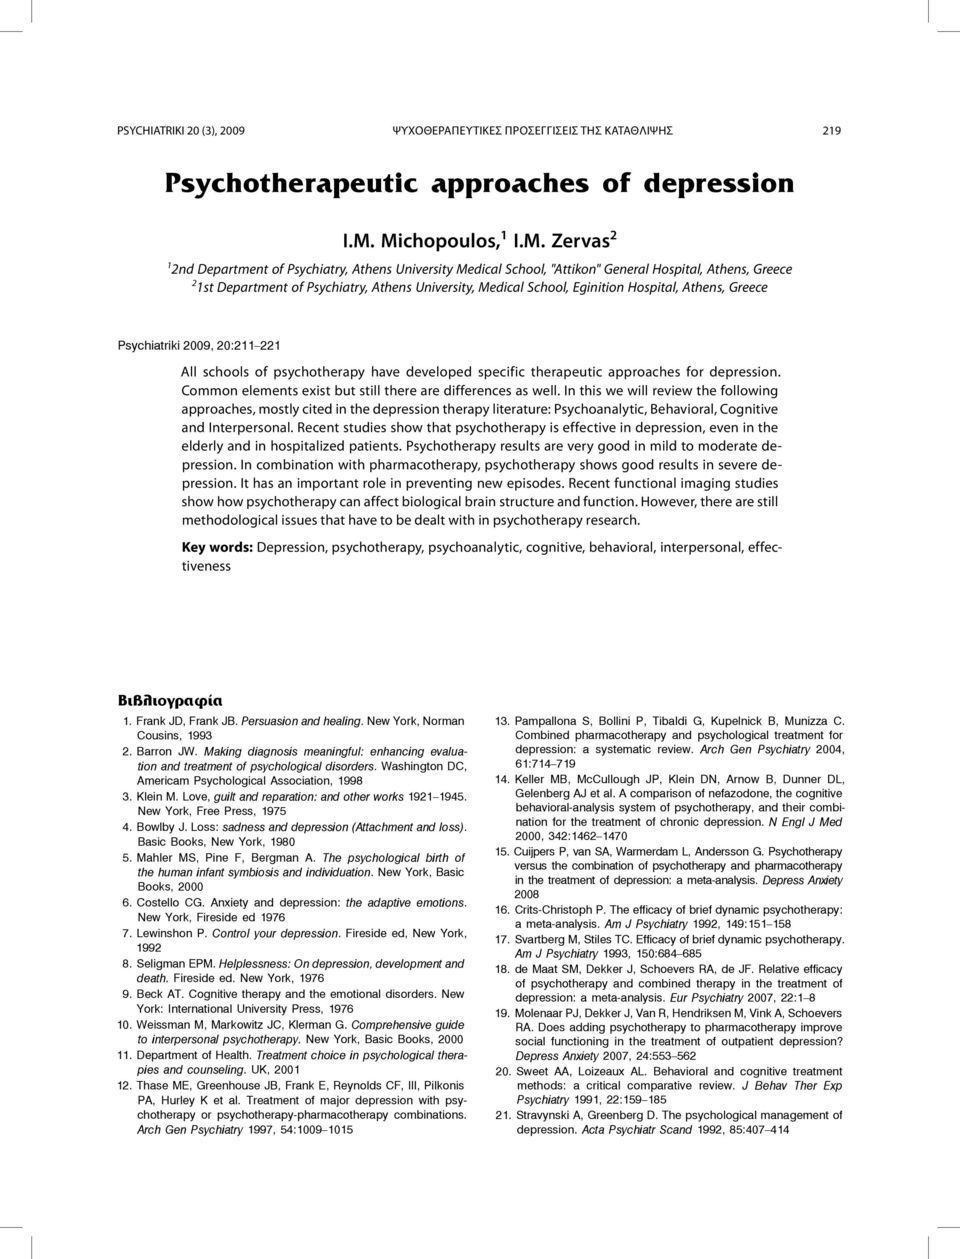 School, Eginition Hospital, Athens, Greece Psychiatriki 2009, 20:211 221 All schools of psychotherapy have developed specific therapeutic approaches for depression.